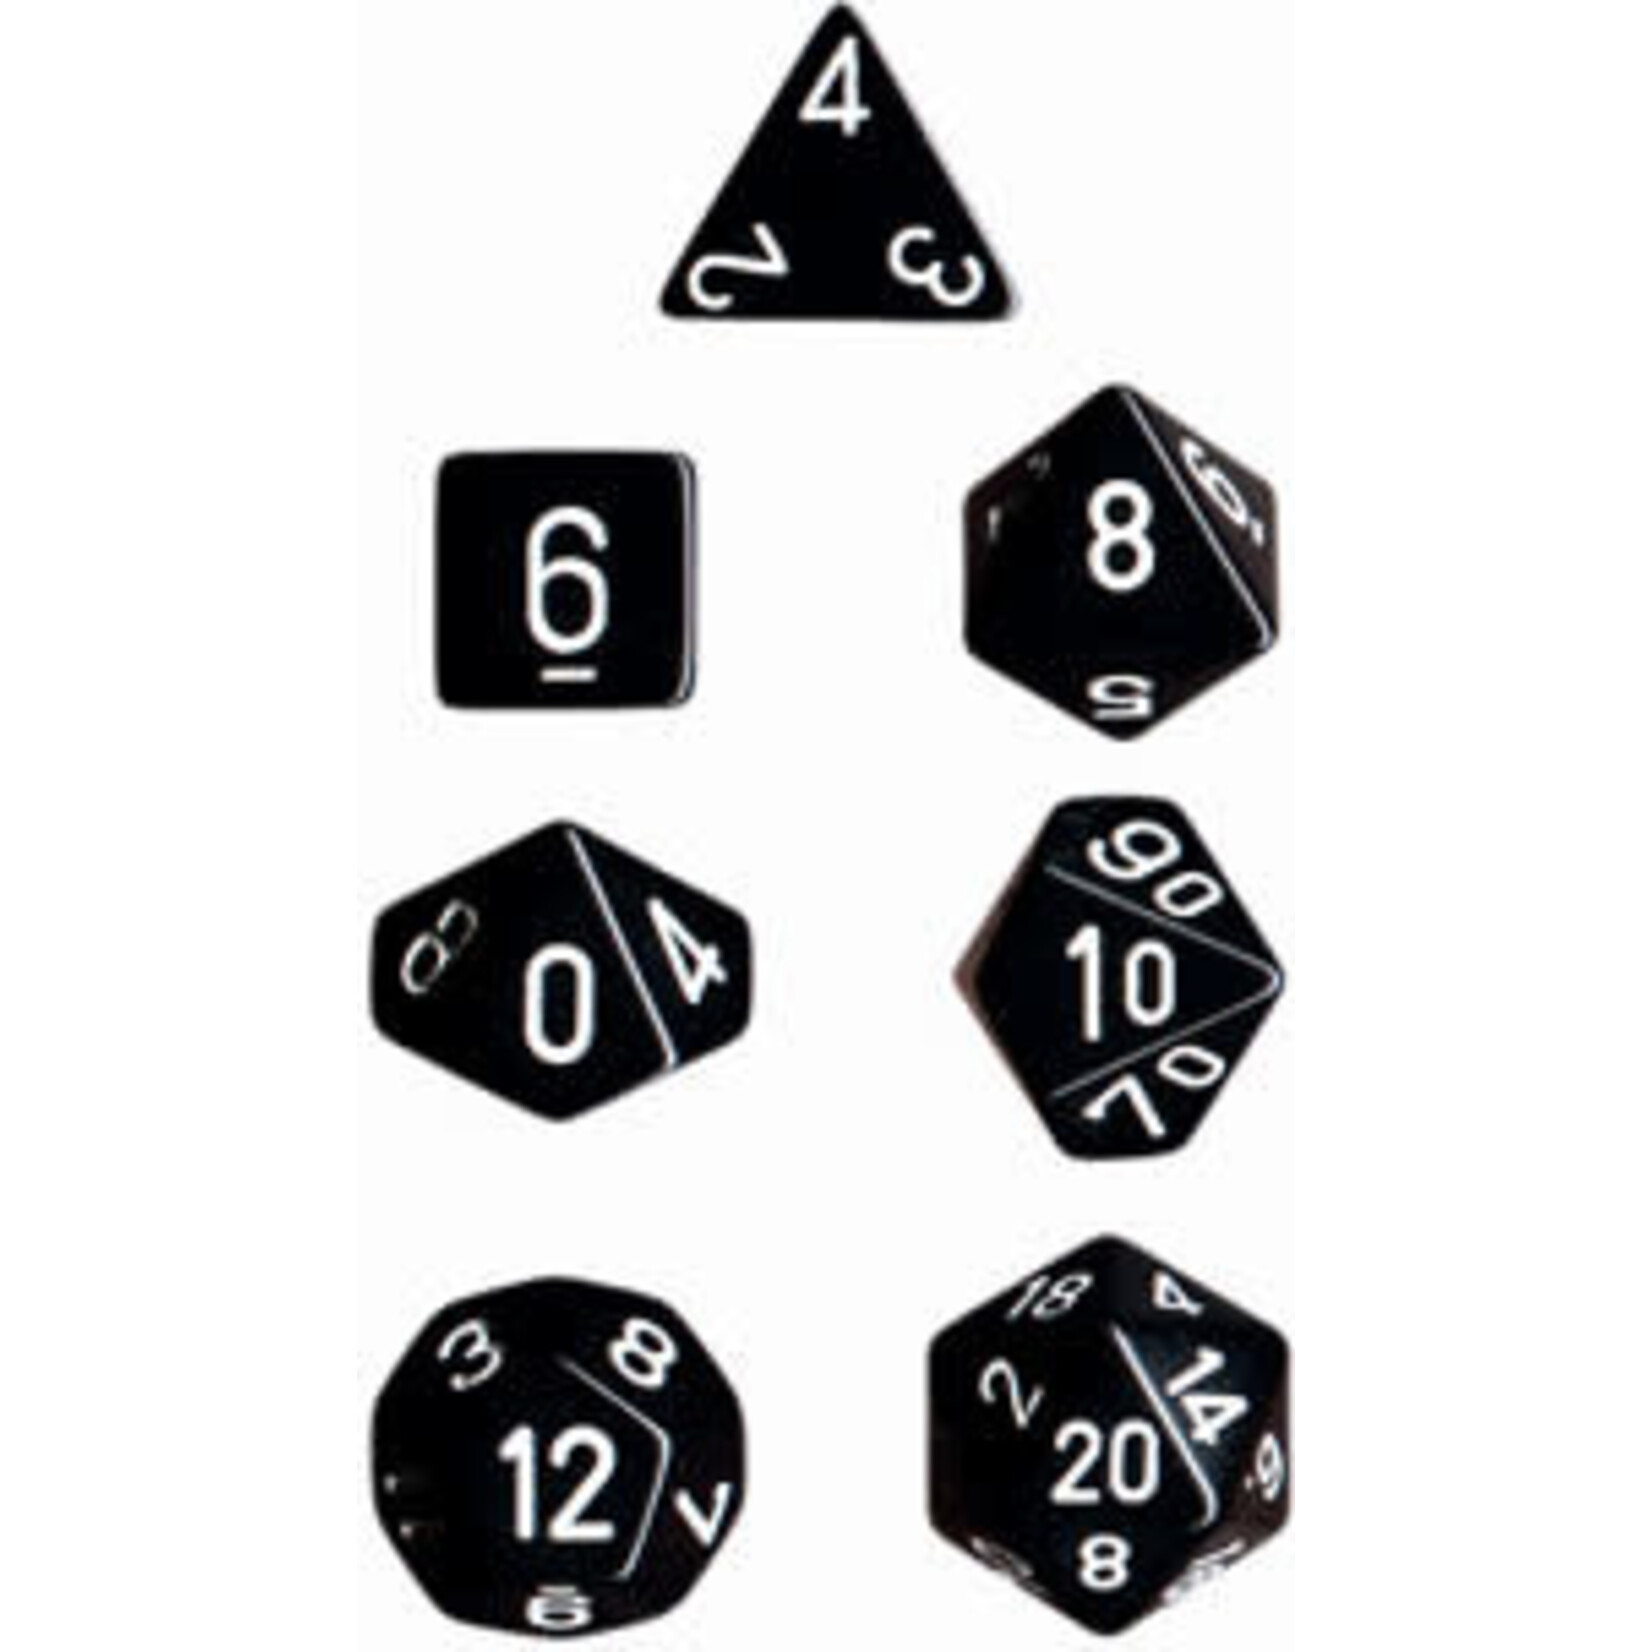 Chessex Opaque Black/white Polyhedral 7-Dice Set